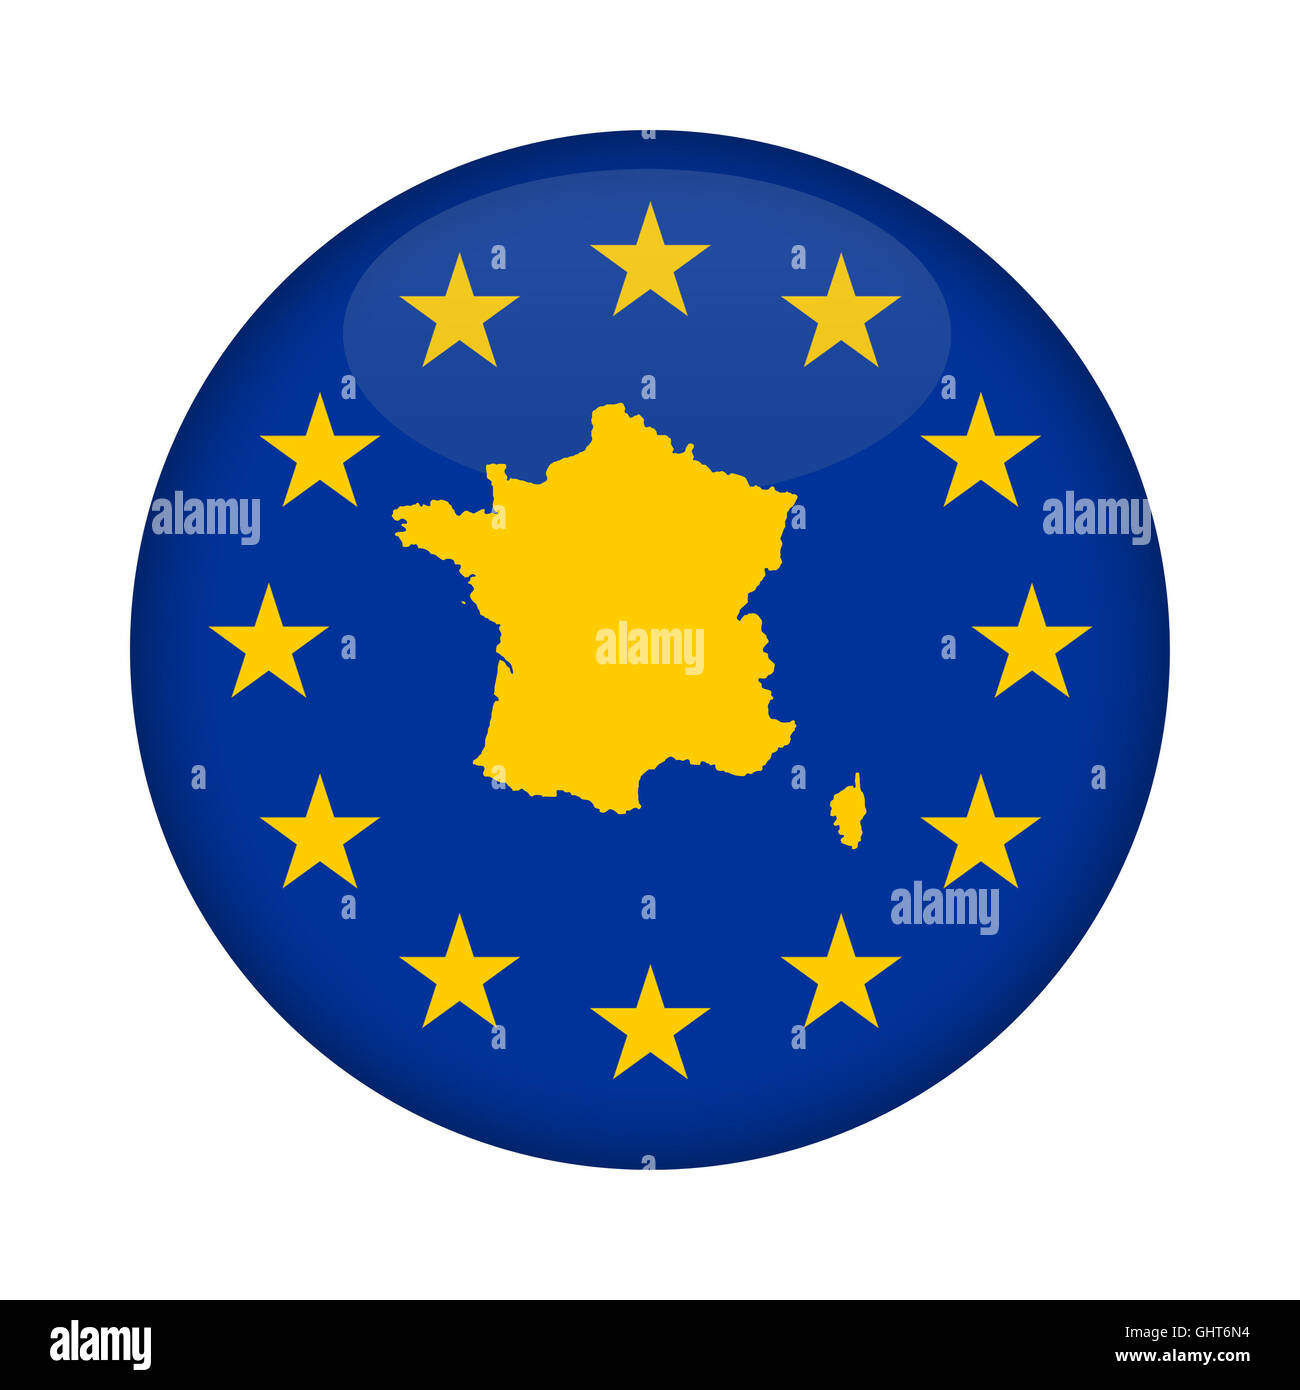 France map on a European Union flag button isolated on a white background. Stock Photo